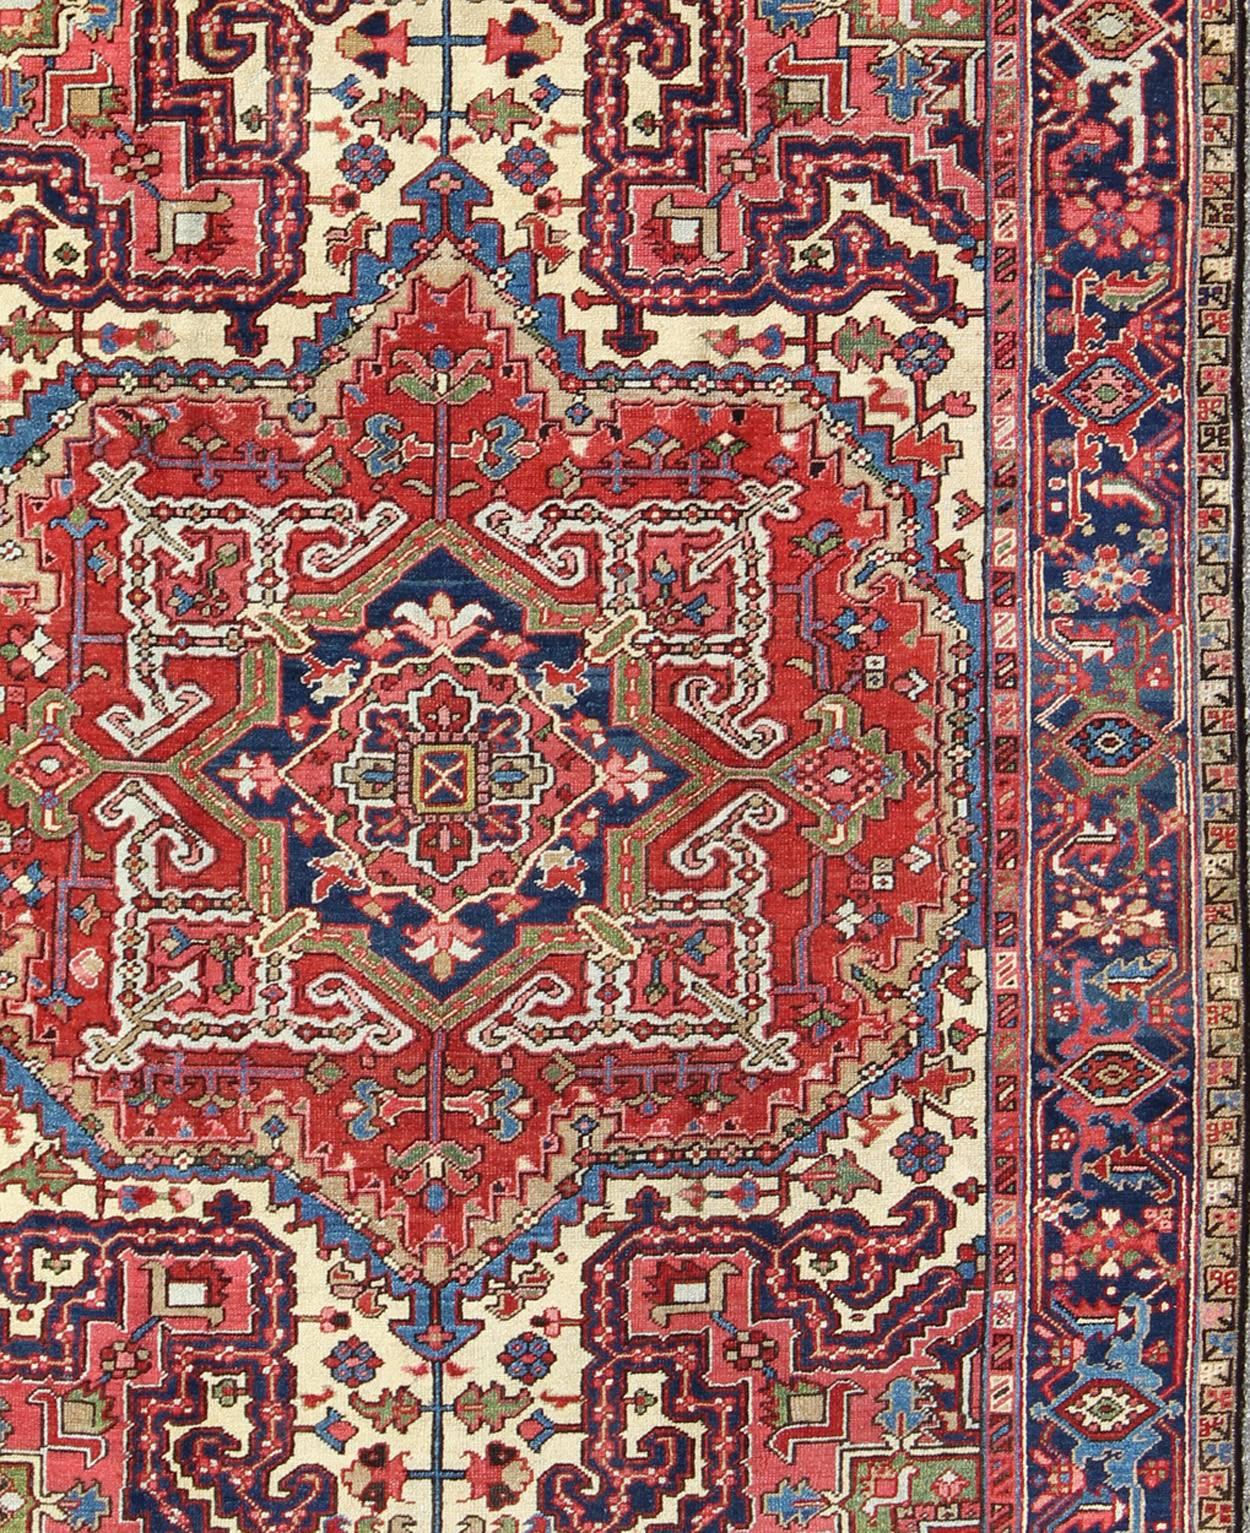 Hand-Knotted Antique Persian Heriz Carpet with Stylized Central Medallion in Warm Hues of Red